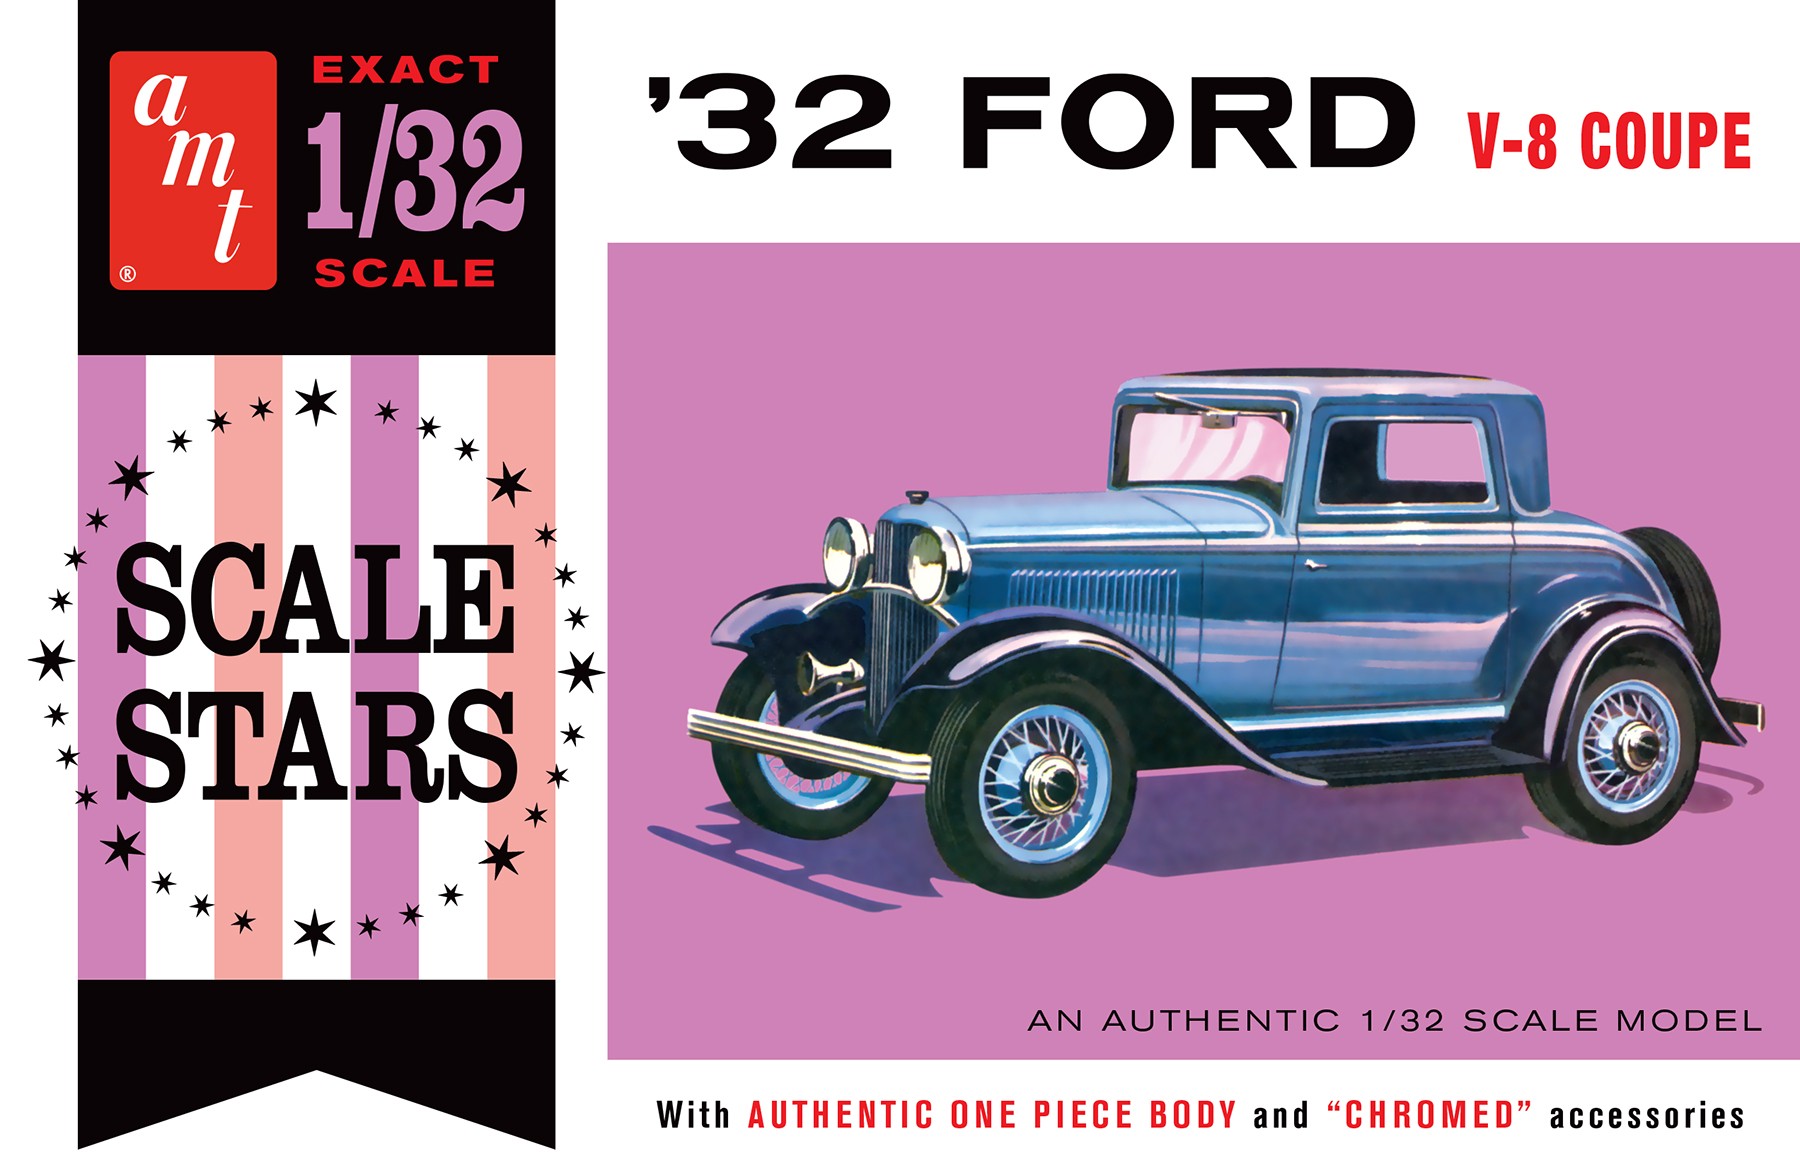 AMT 1181 FORD 1932 SCALE STARS 1:32